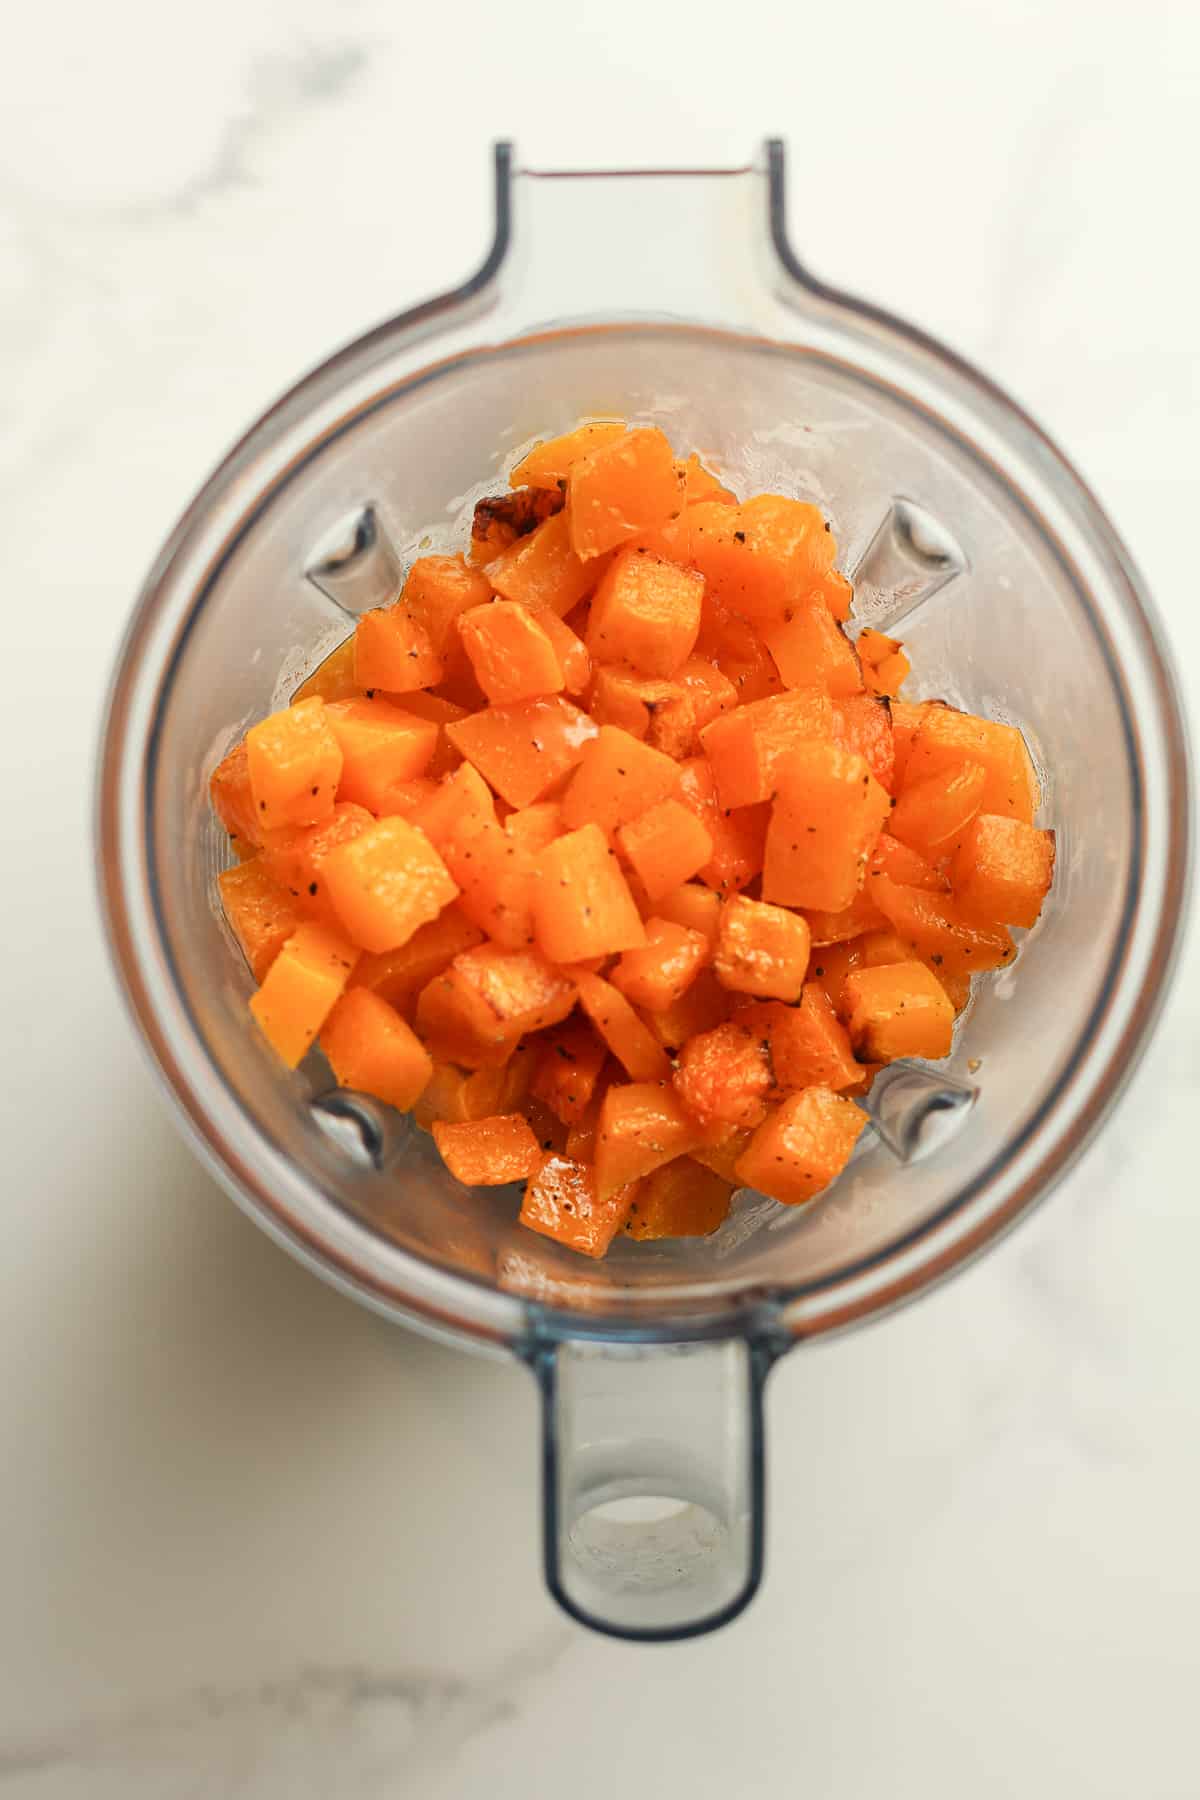 A blender with the roasted and cubed butternut squash.